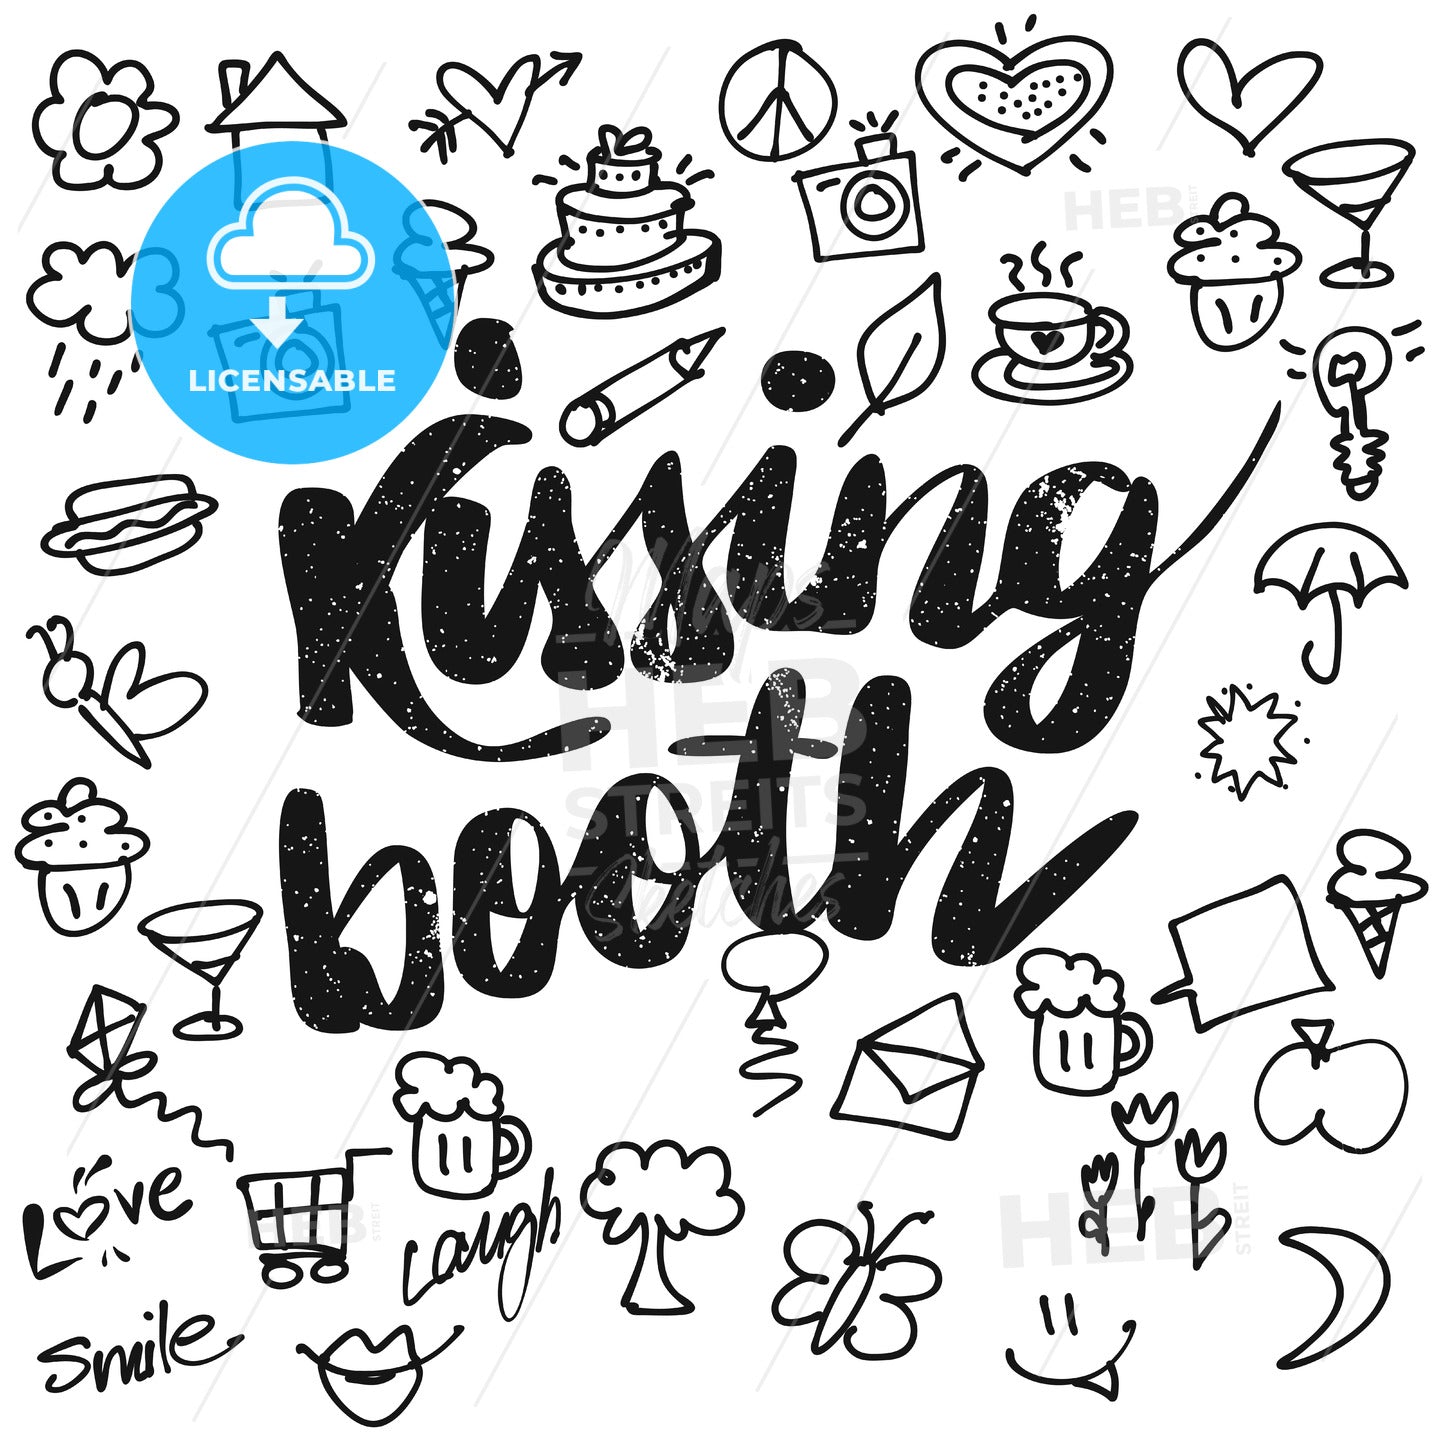 Kissing booth Typo and Doodles – instant download